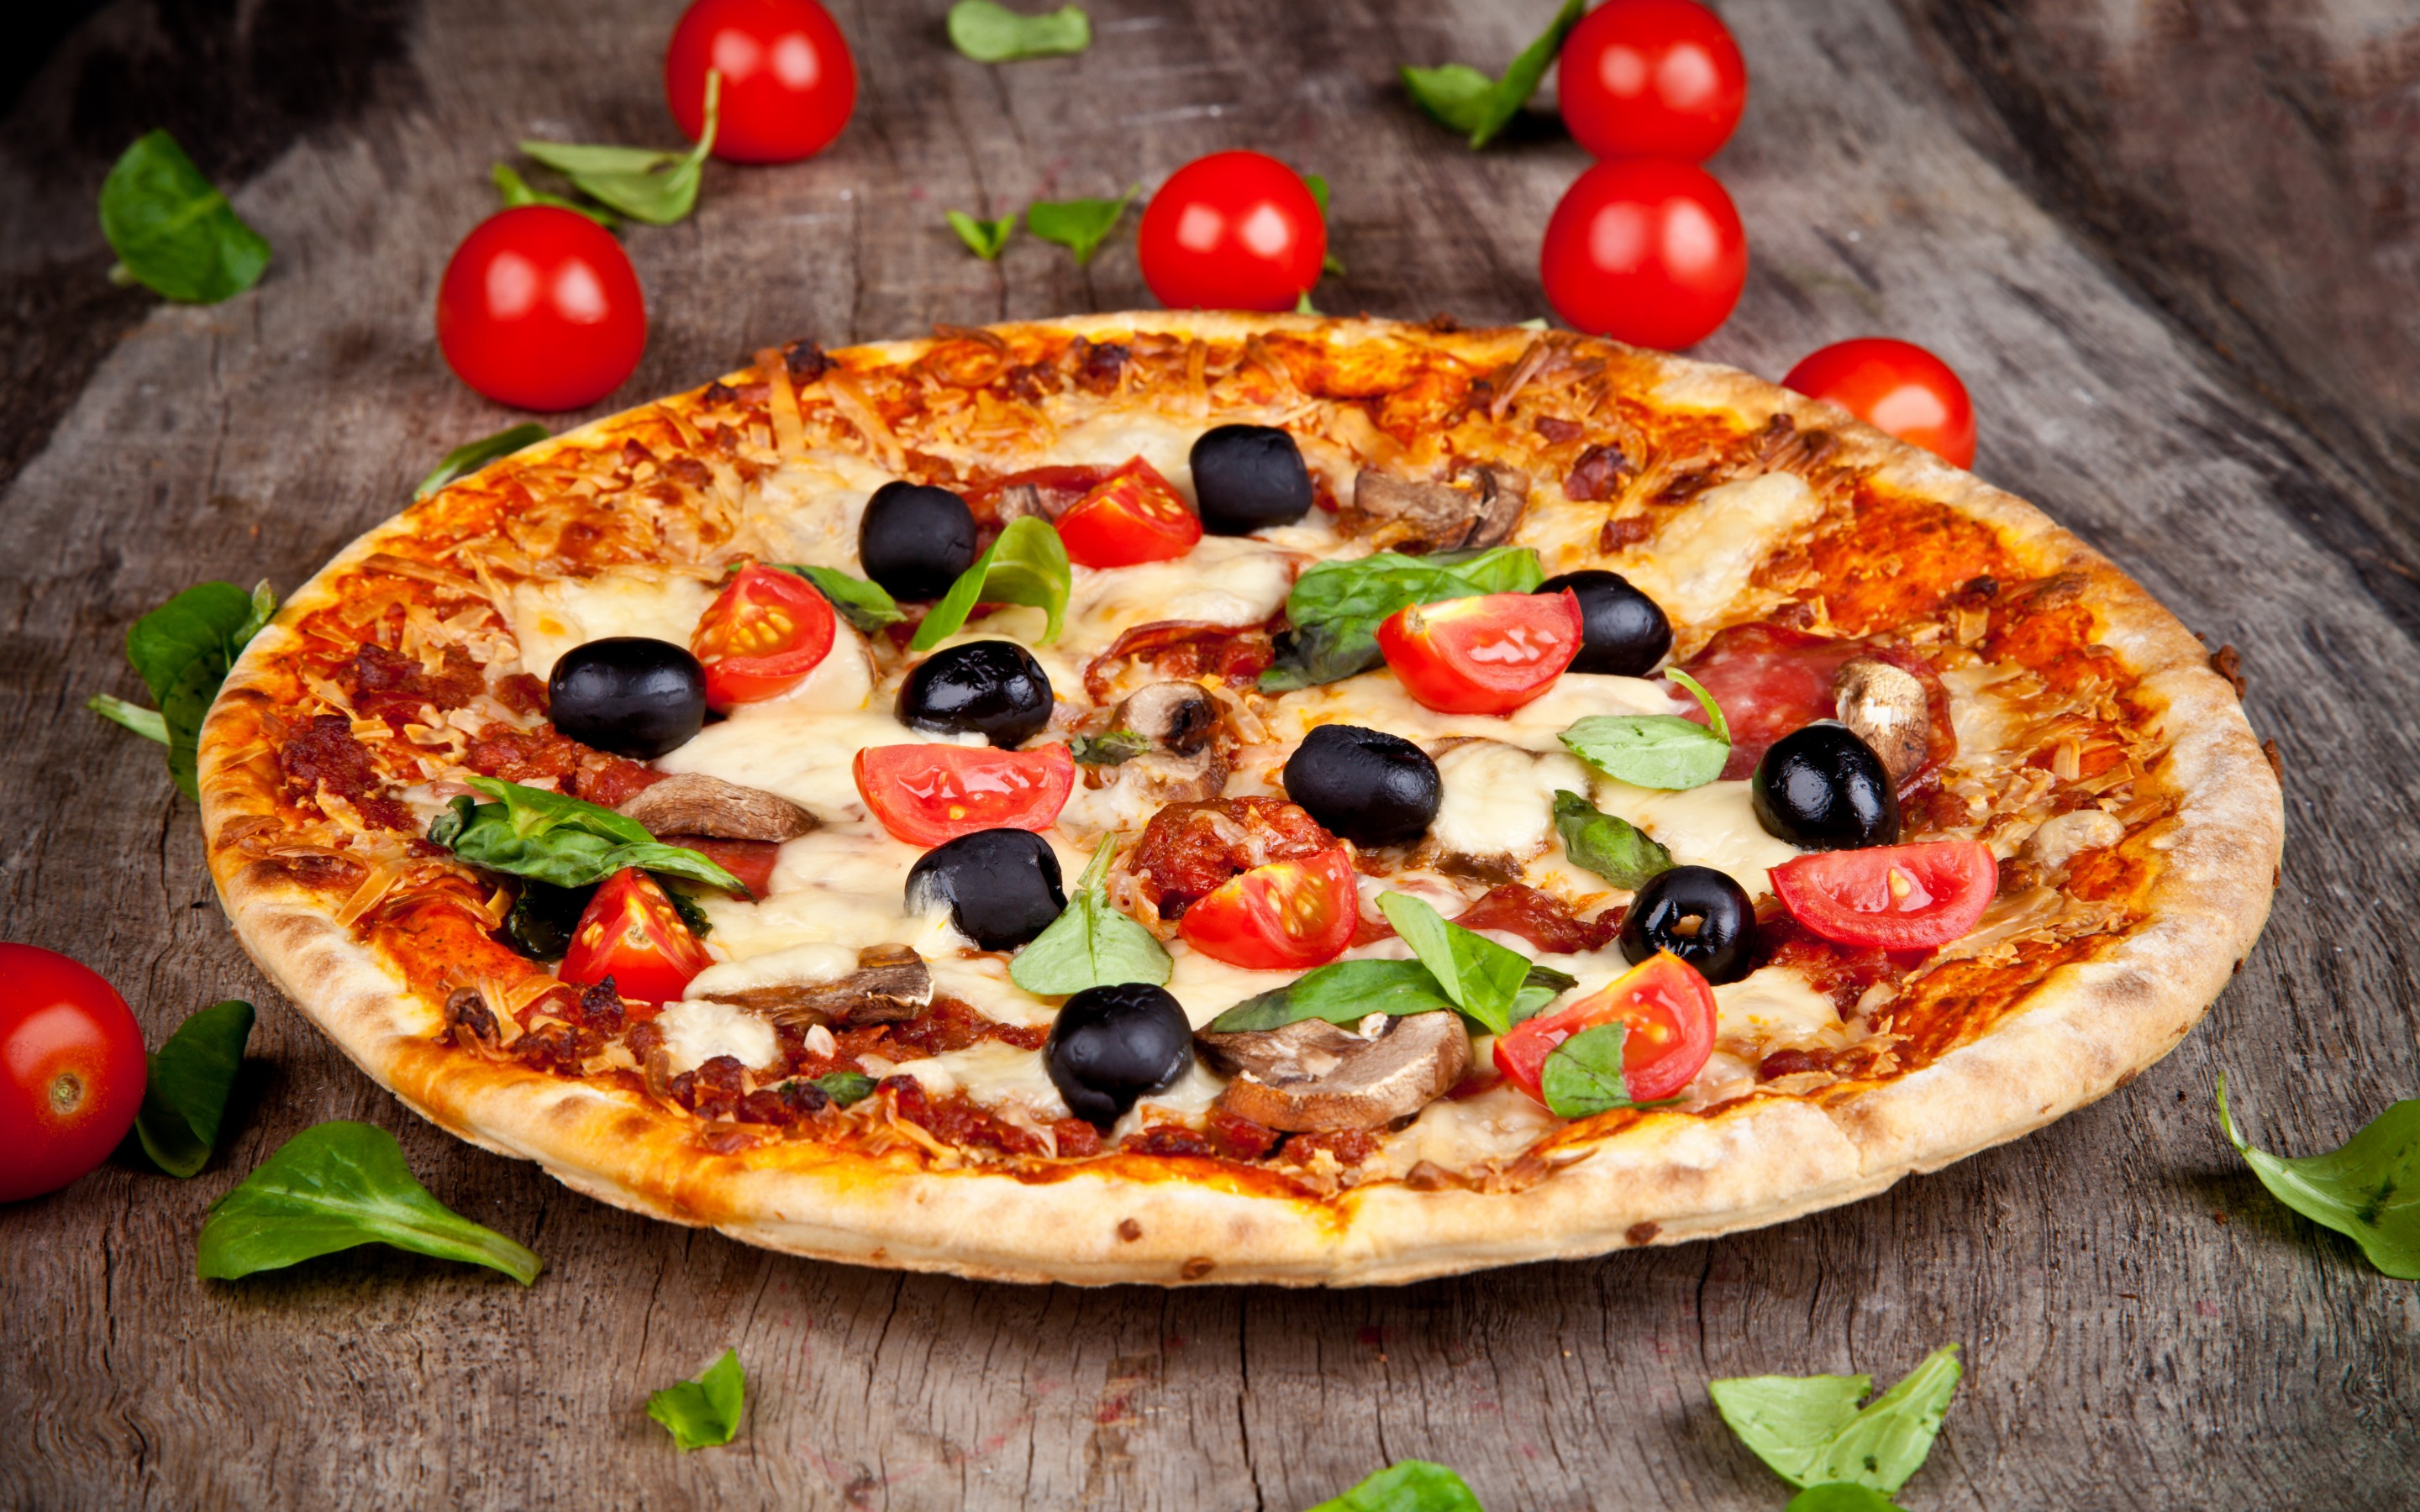 Pizza Olives Tomatoes Basil 2880x1800